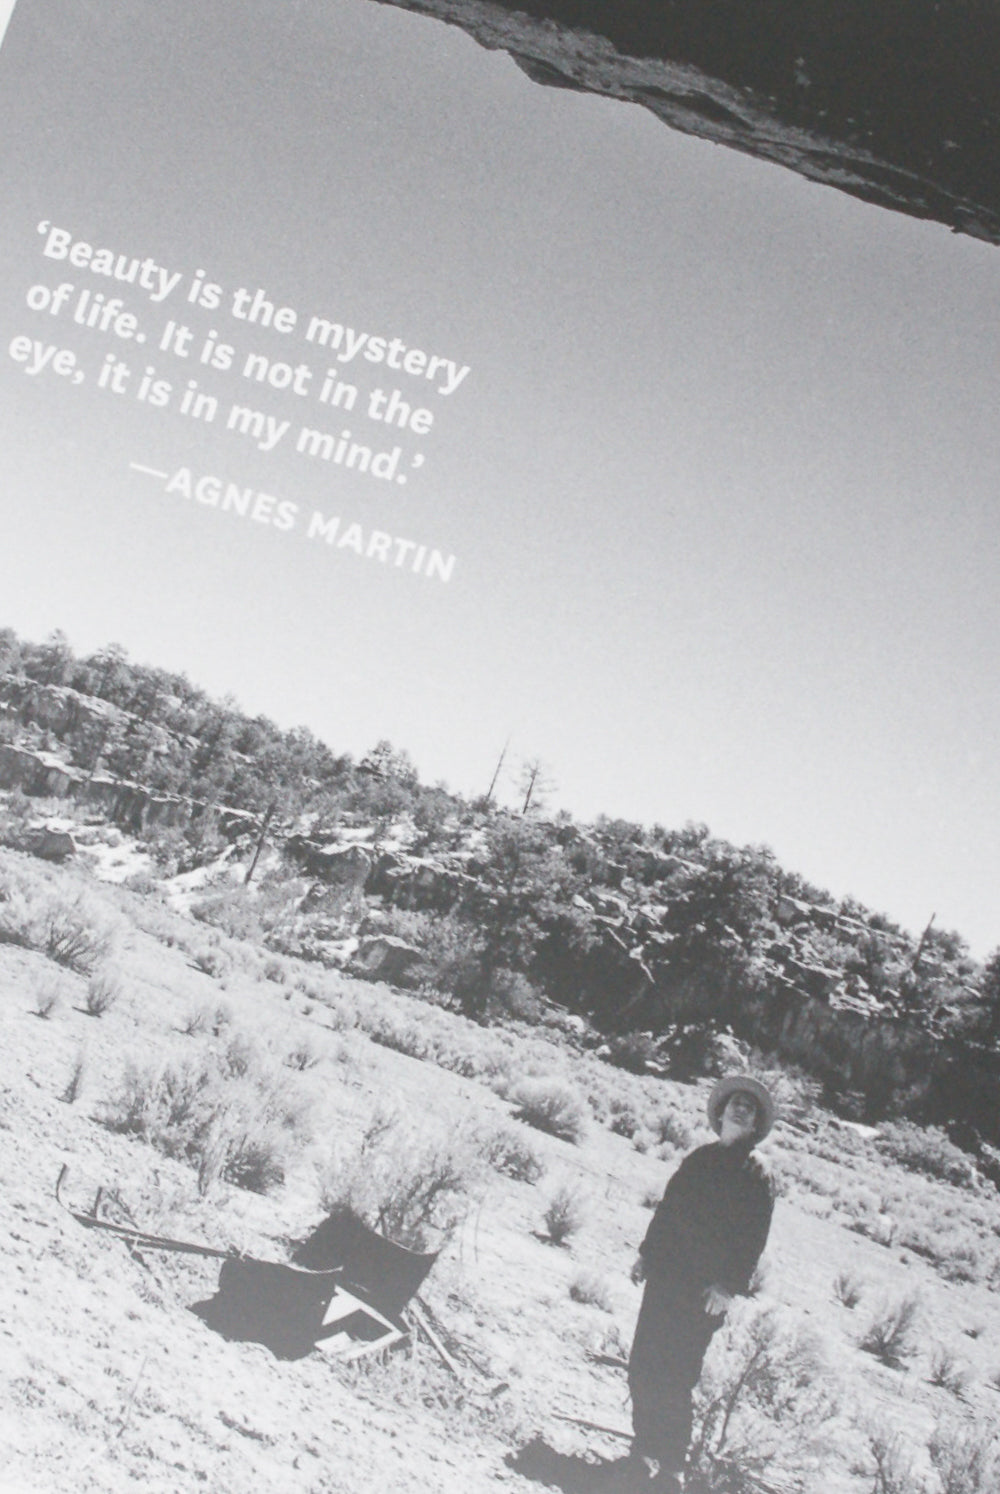 A monochrome image of a person standing in a desert landscape, with a quote by Agnes Martin about beauty being a mystery of life, captured during a retrospective exhibition from the Agnes Martin: Illustrated Monograph by Artbook/D.A.P.